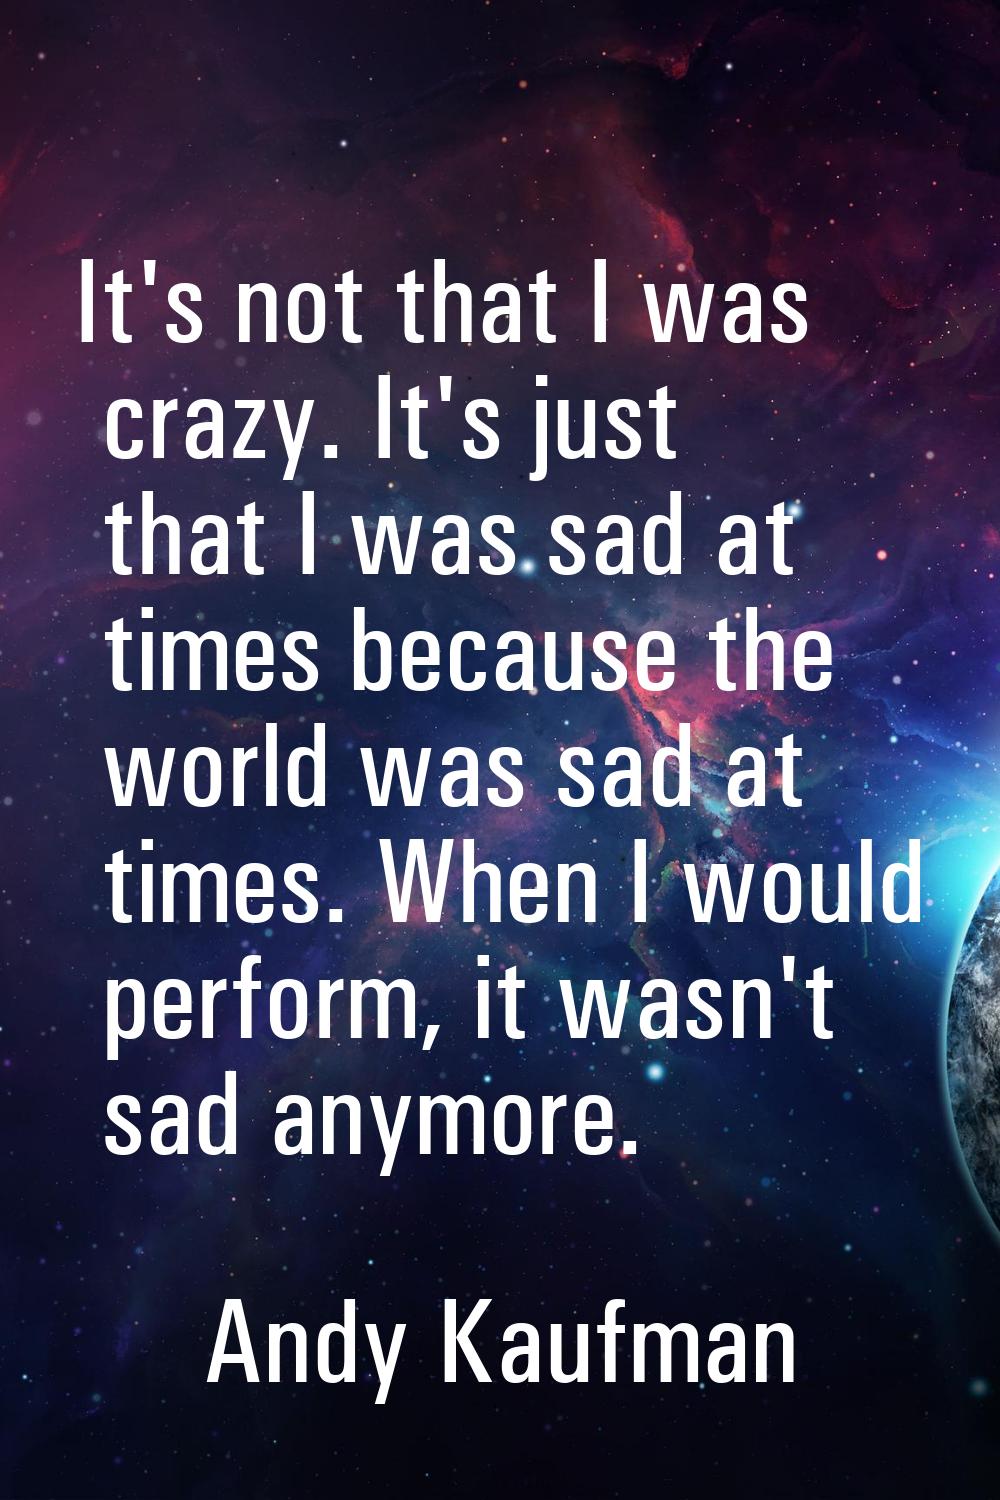 It's not that I was crazy. It's just that I was sad at times because the world was sad at times. Wh